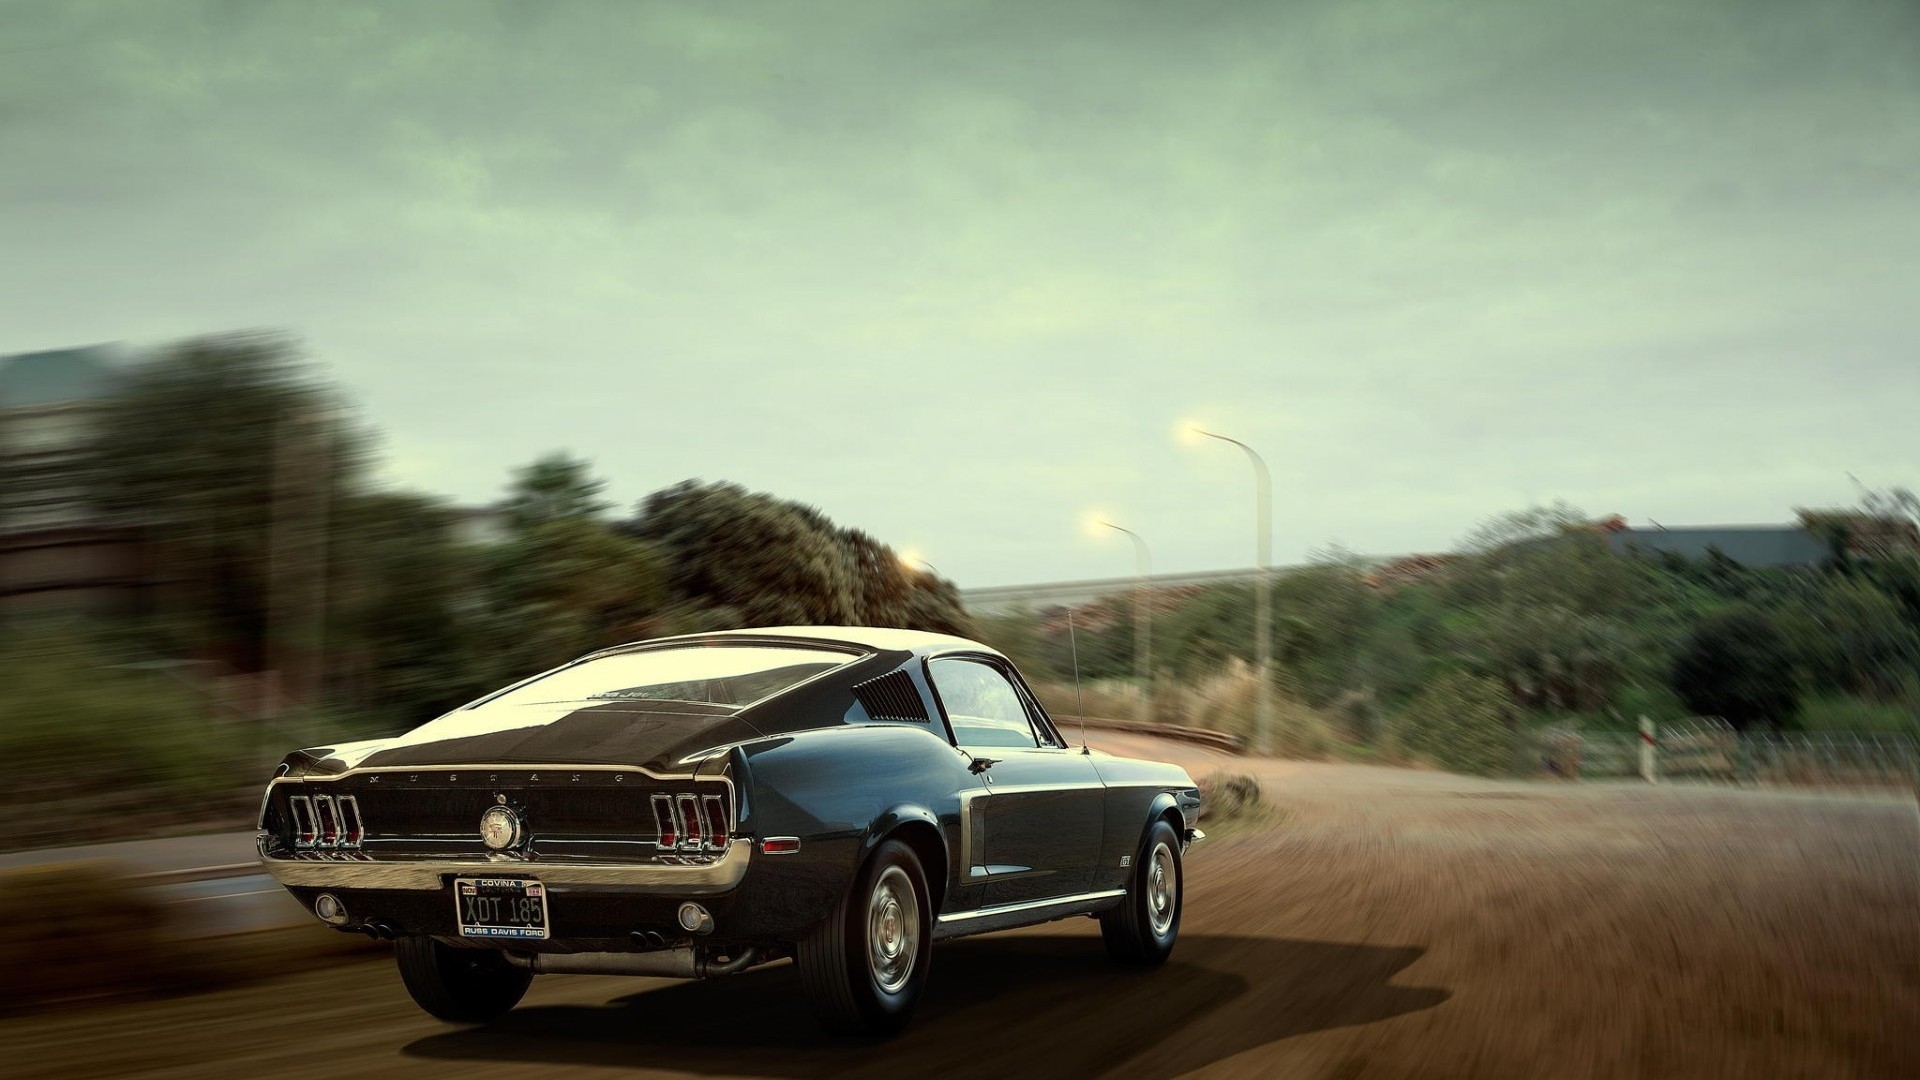 Stunning Old Mustang for 1920 x 1080 HDTV 1080p resolution